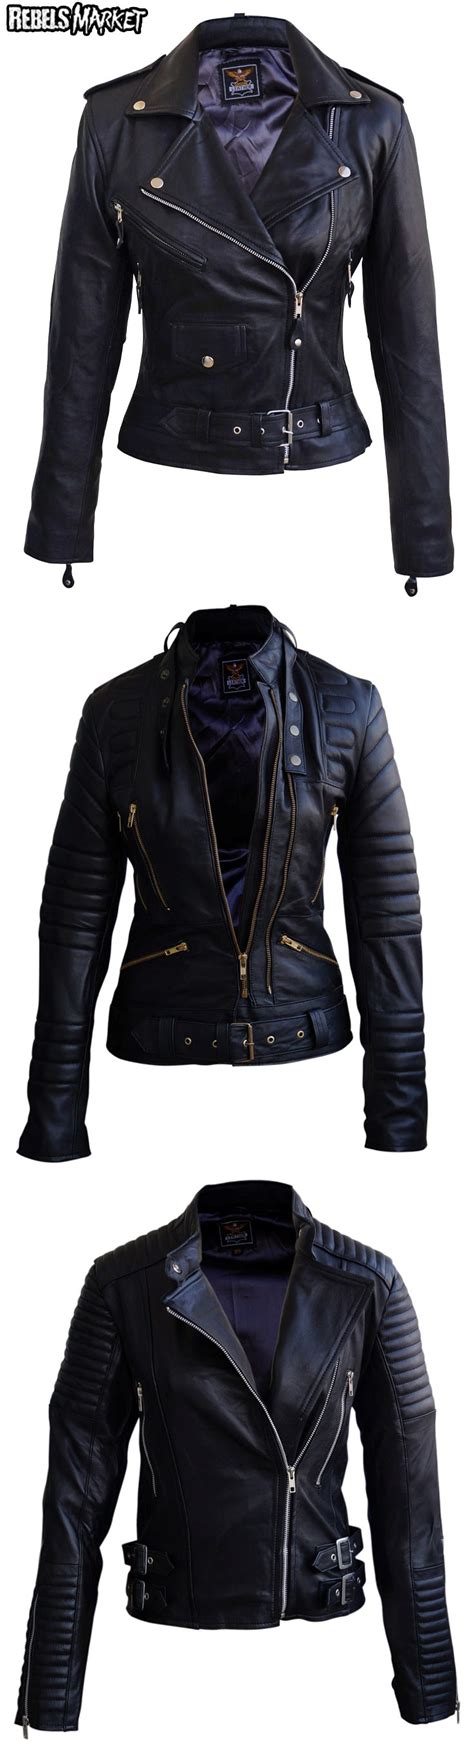 shop leather jackets at rebelsmarket badass style punk outfits clothes